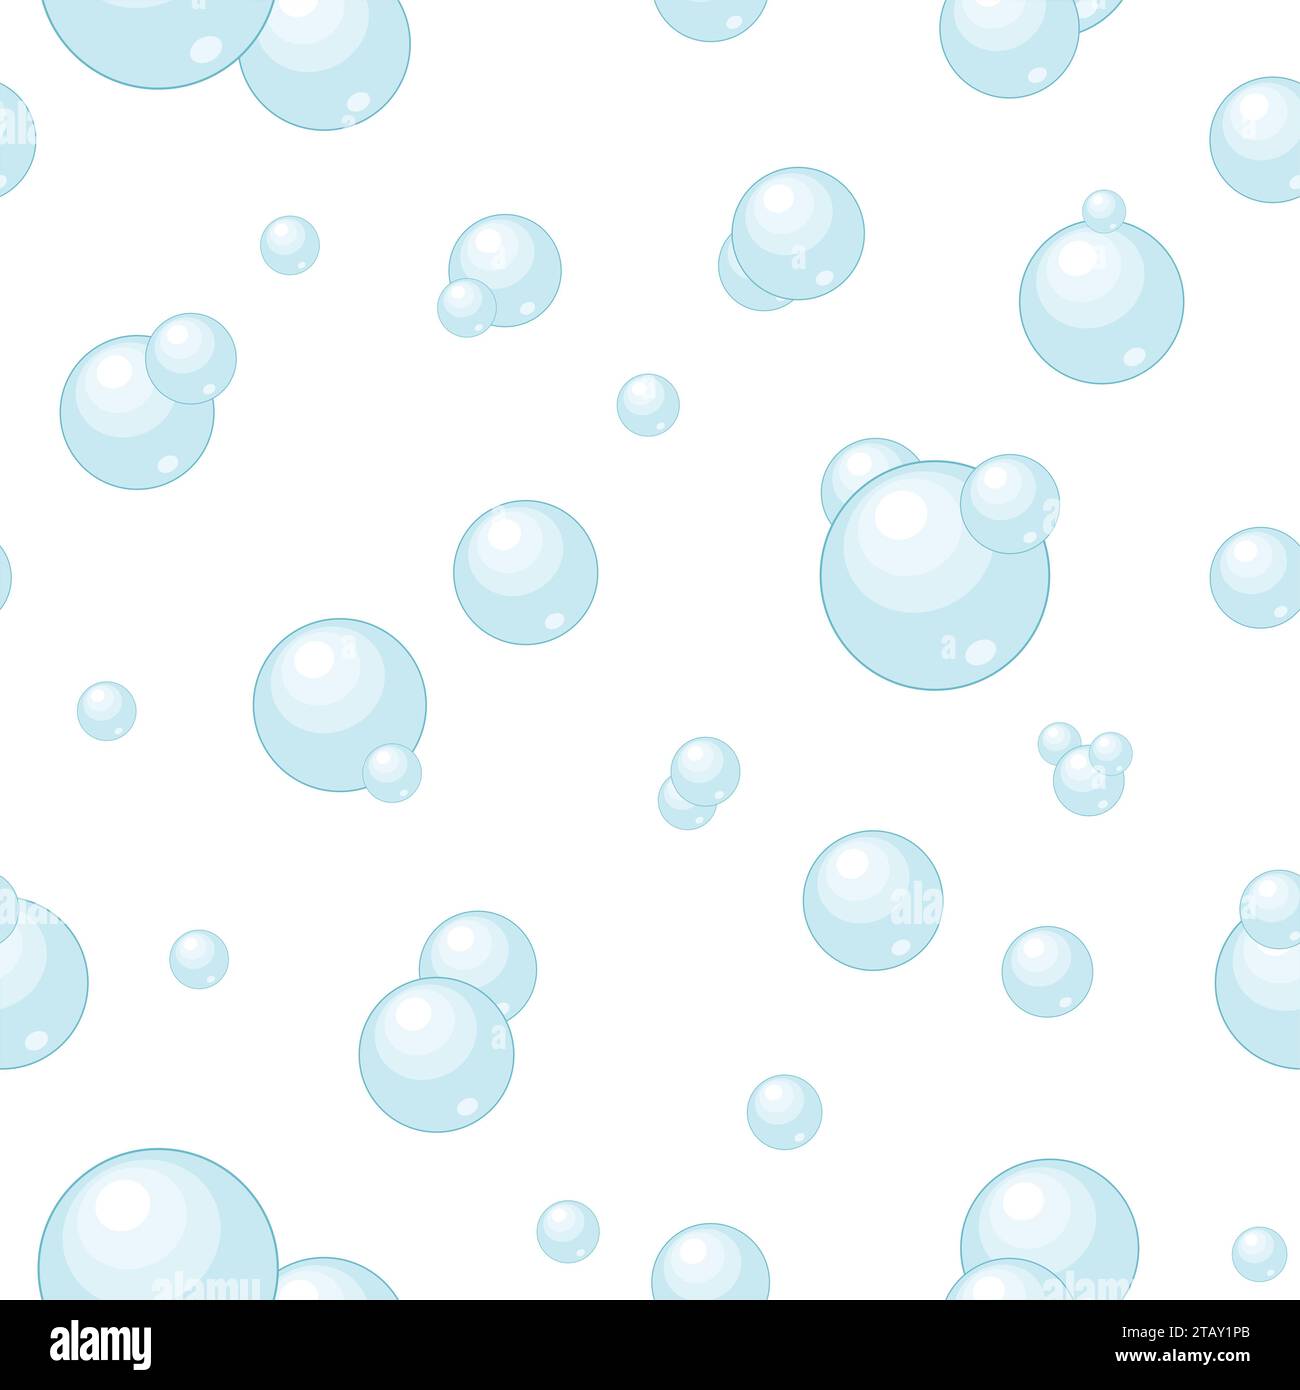 Bubble blower seamless pattern on white background in flat style Stock Vector